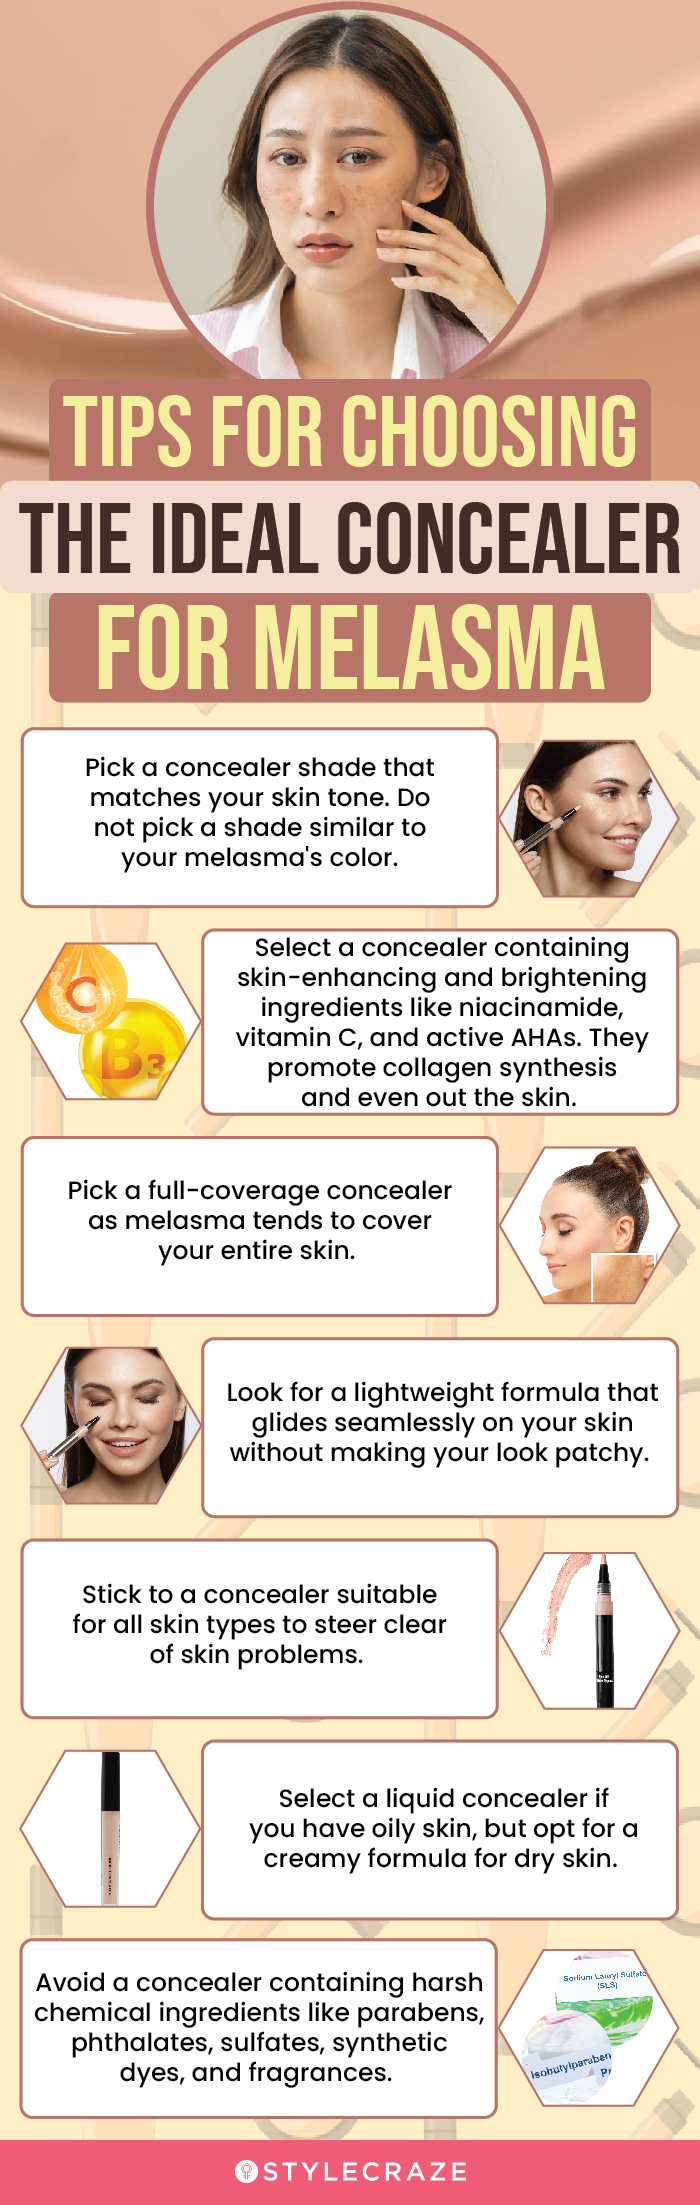 Tips For Choosing The Ideal Concealer For Melasma (infographic)